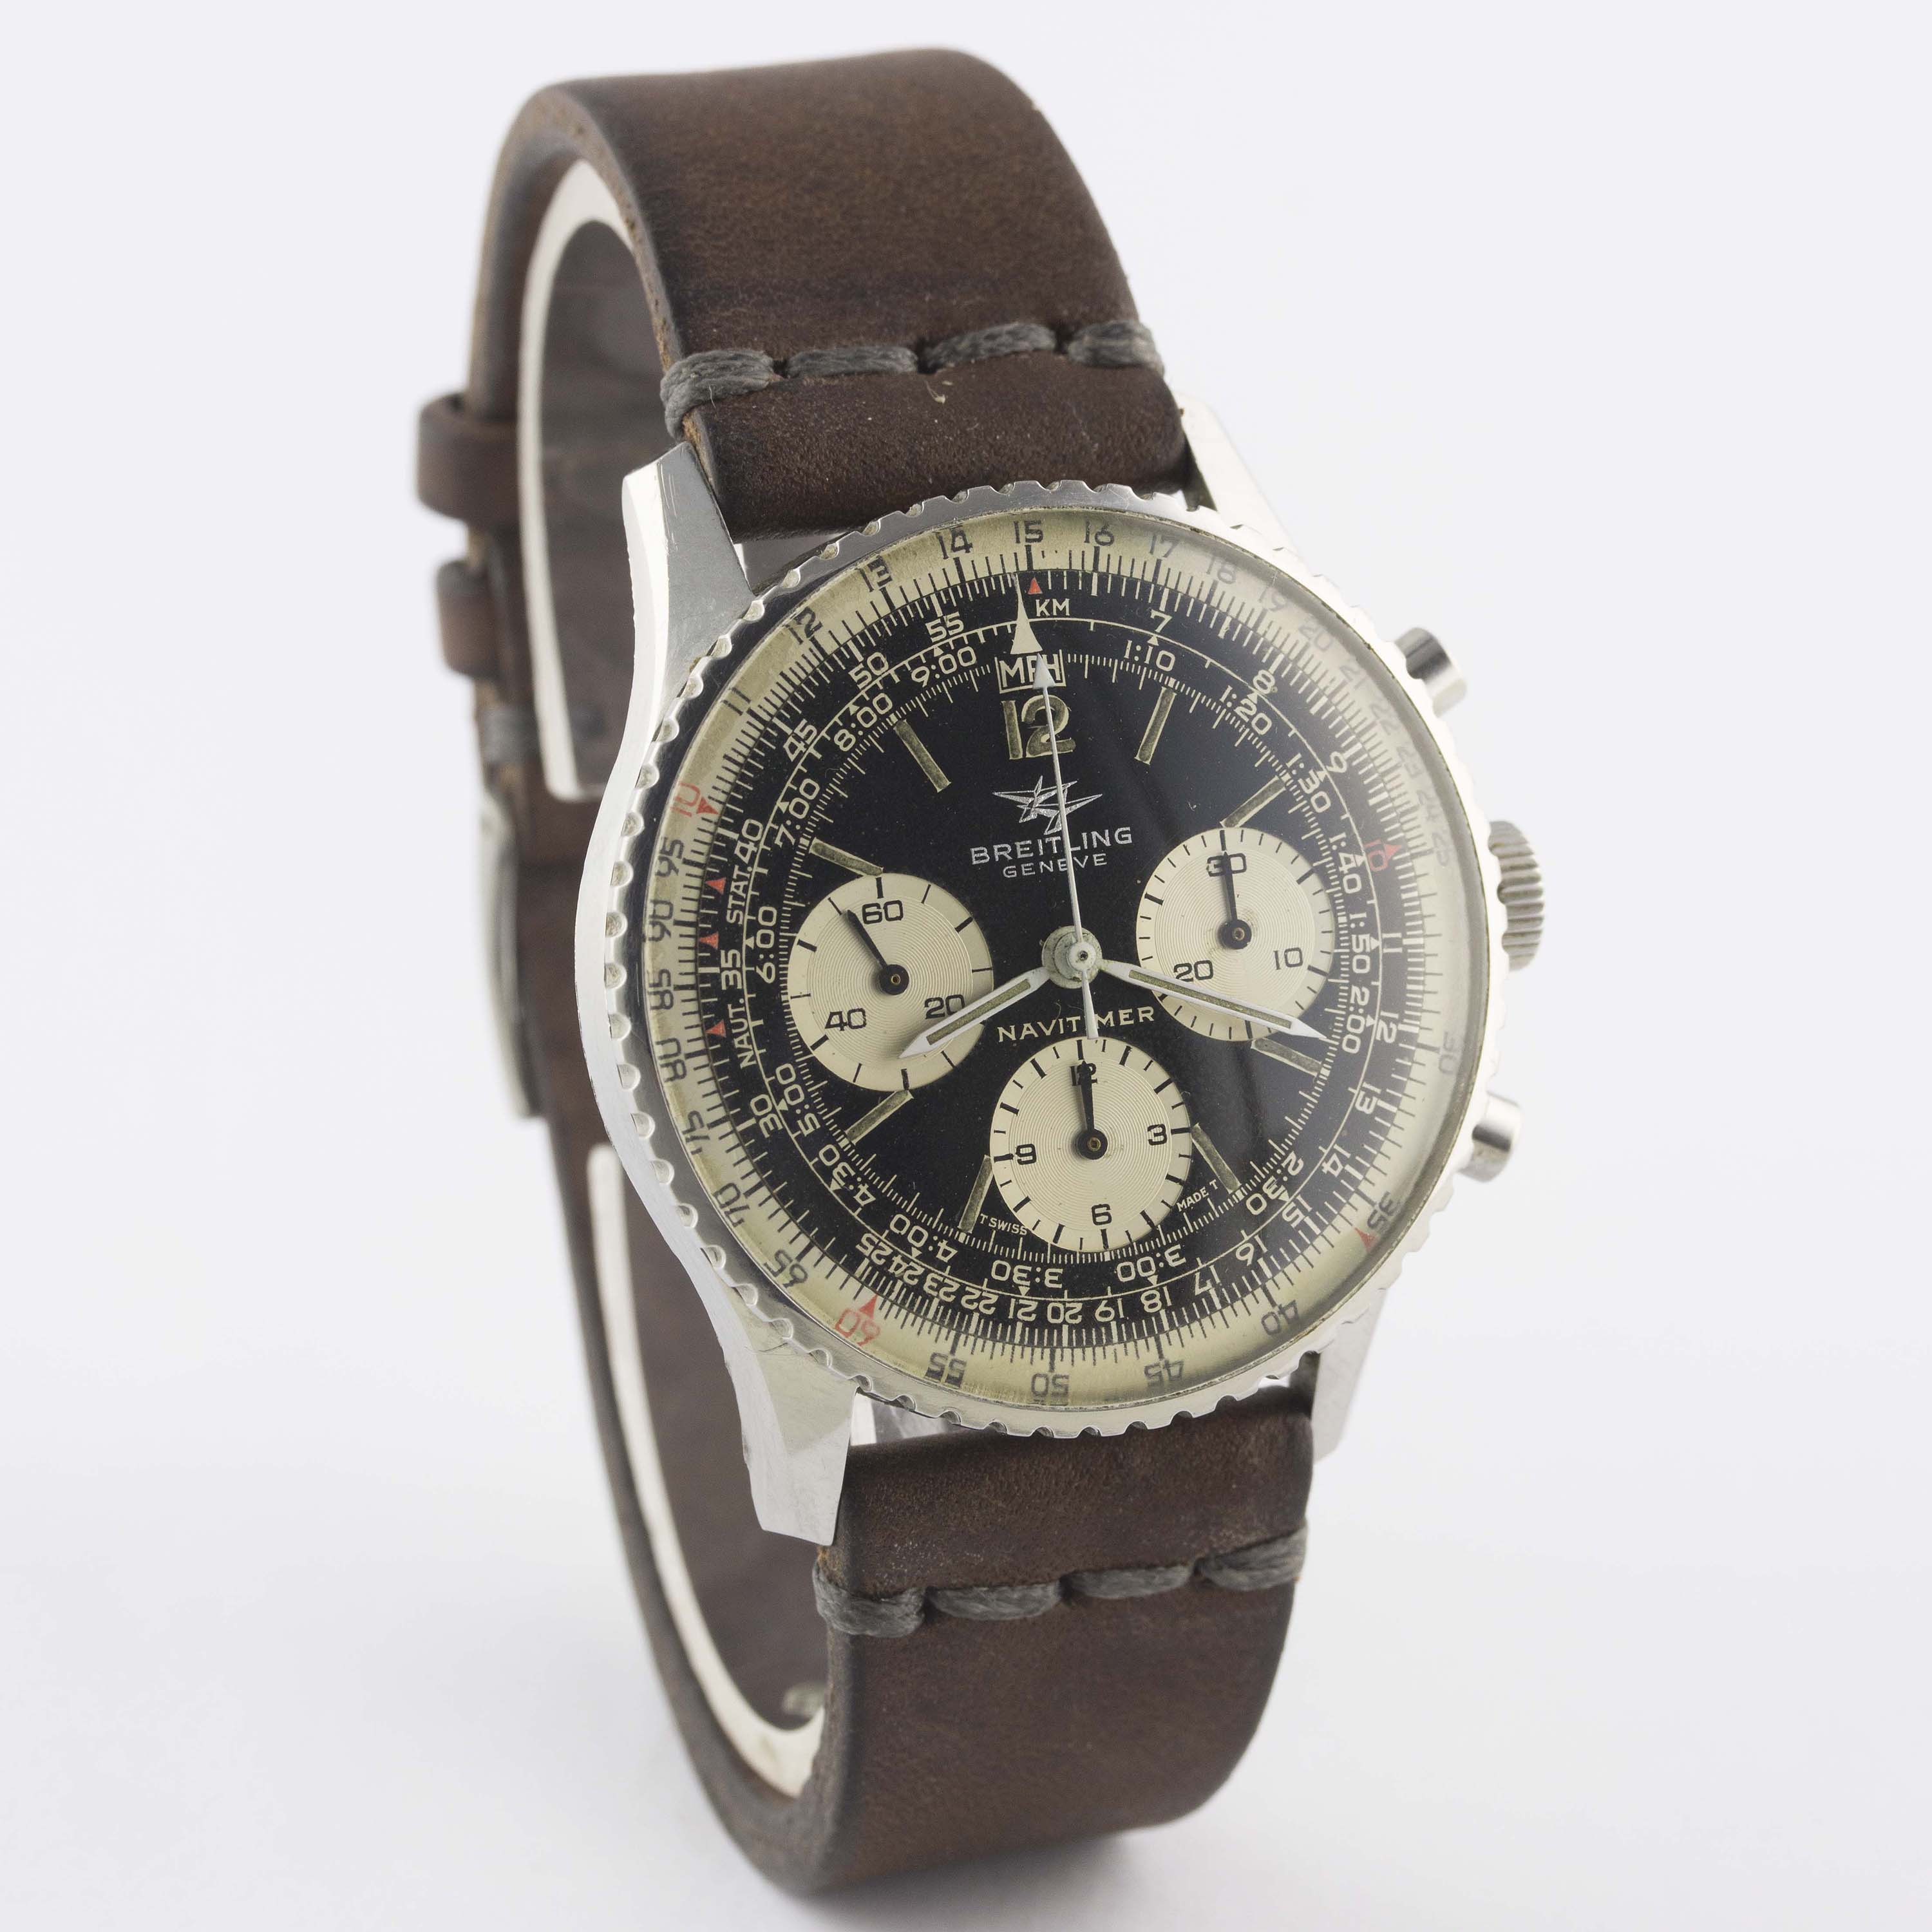 A GENTLEMAN'S STAINLESS STEEL BREITLING NAVITIMER CHRONOGRAPH WRIST WATCH CIRCA 1969, REF. 806 - Image 6 of 11